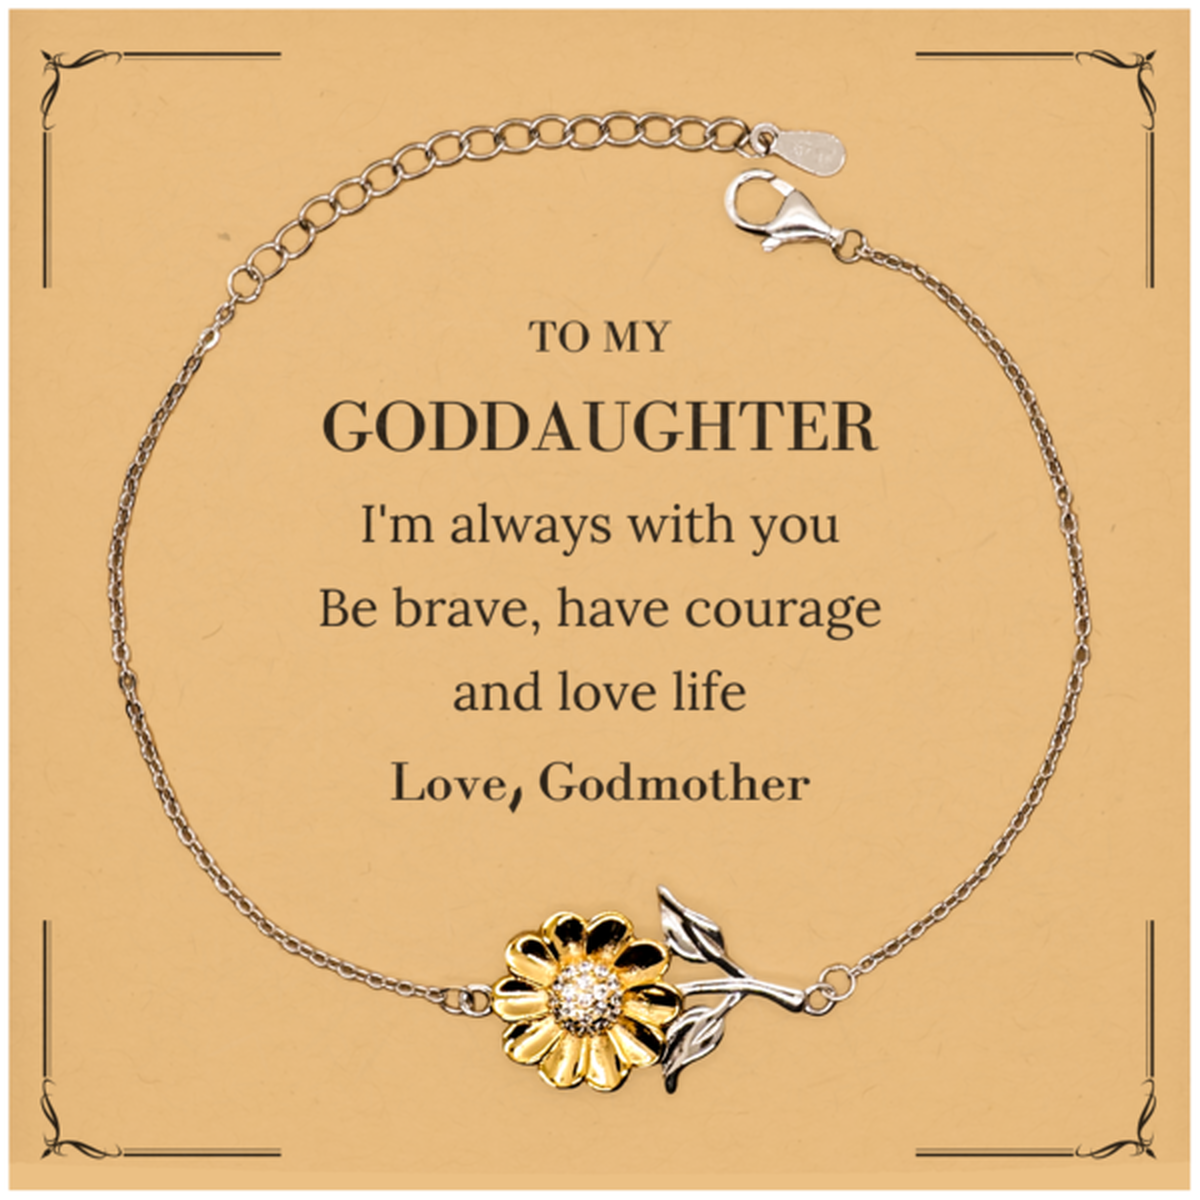 To My Goddaughter Gifts from Godmother, Unique Sunflower Bracelet Inspirational Christmas Birthday Graduation Gifts for Goddaughter I'm always with you. Be brave, have courage and love life. Love, Godmother